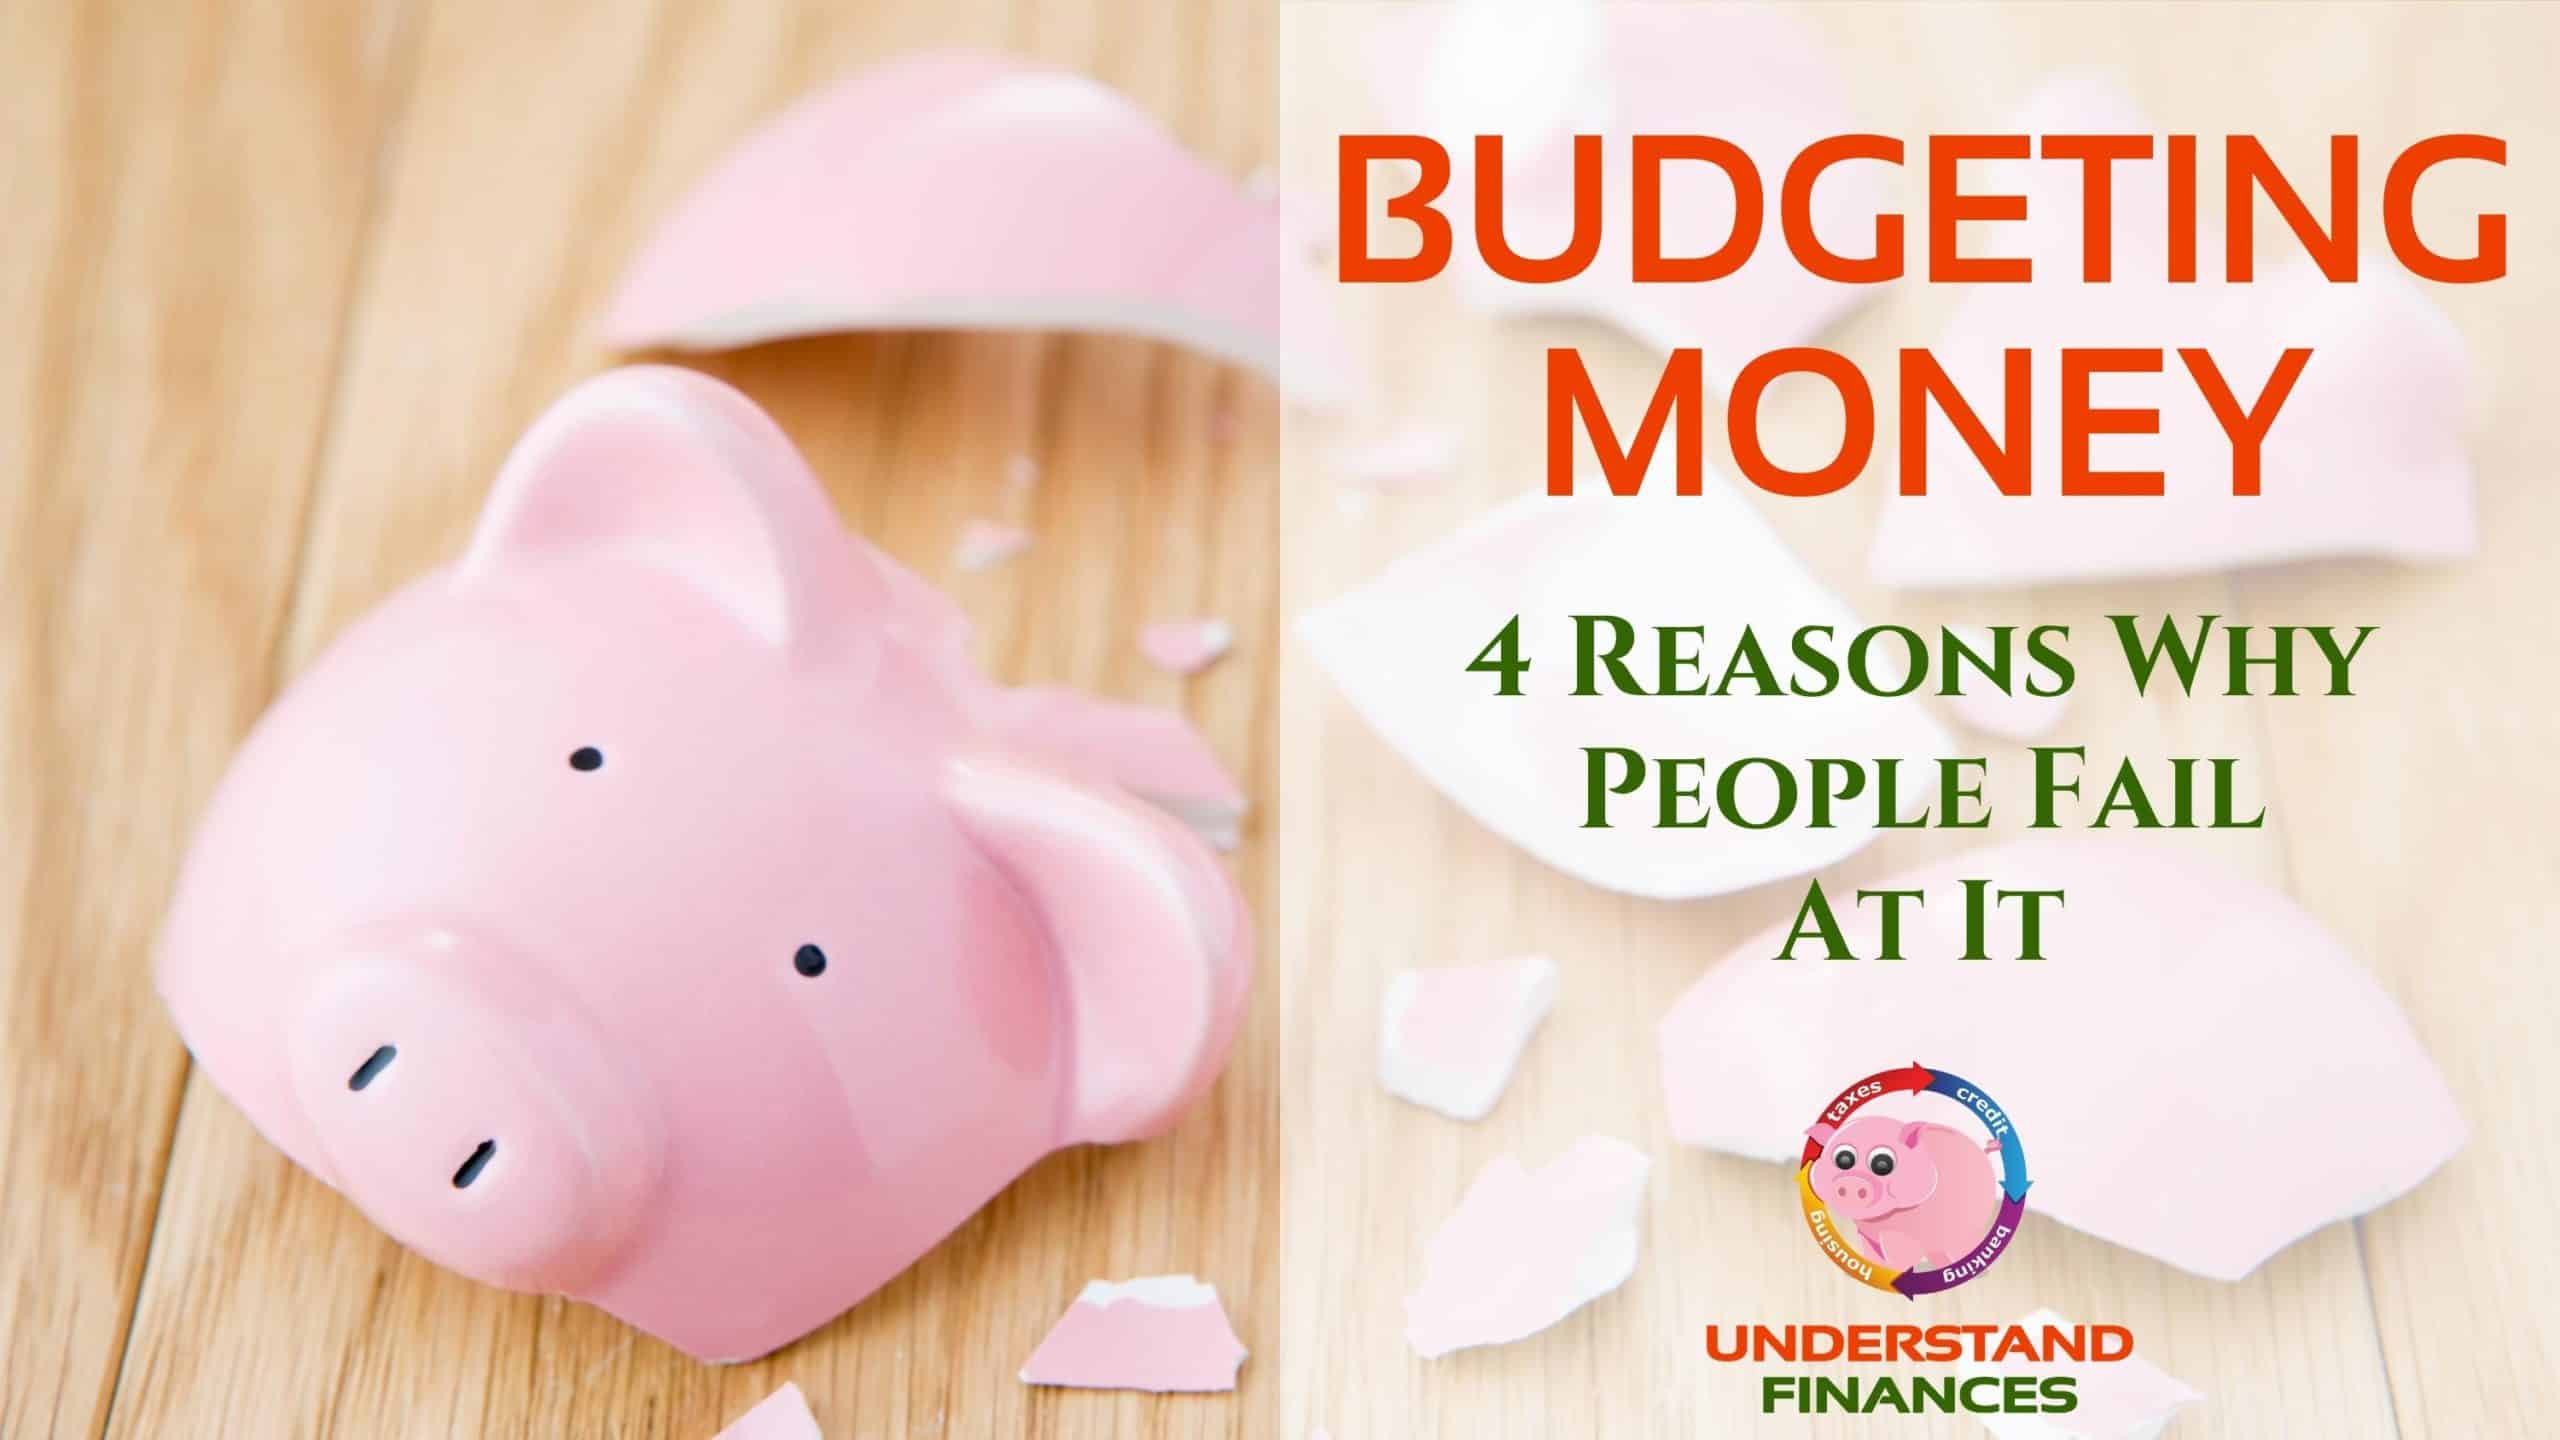 Budgeting Money: 4 Reasons Why People Fail At It